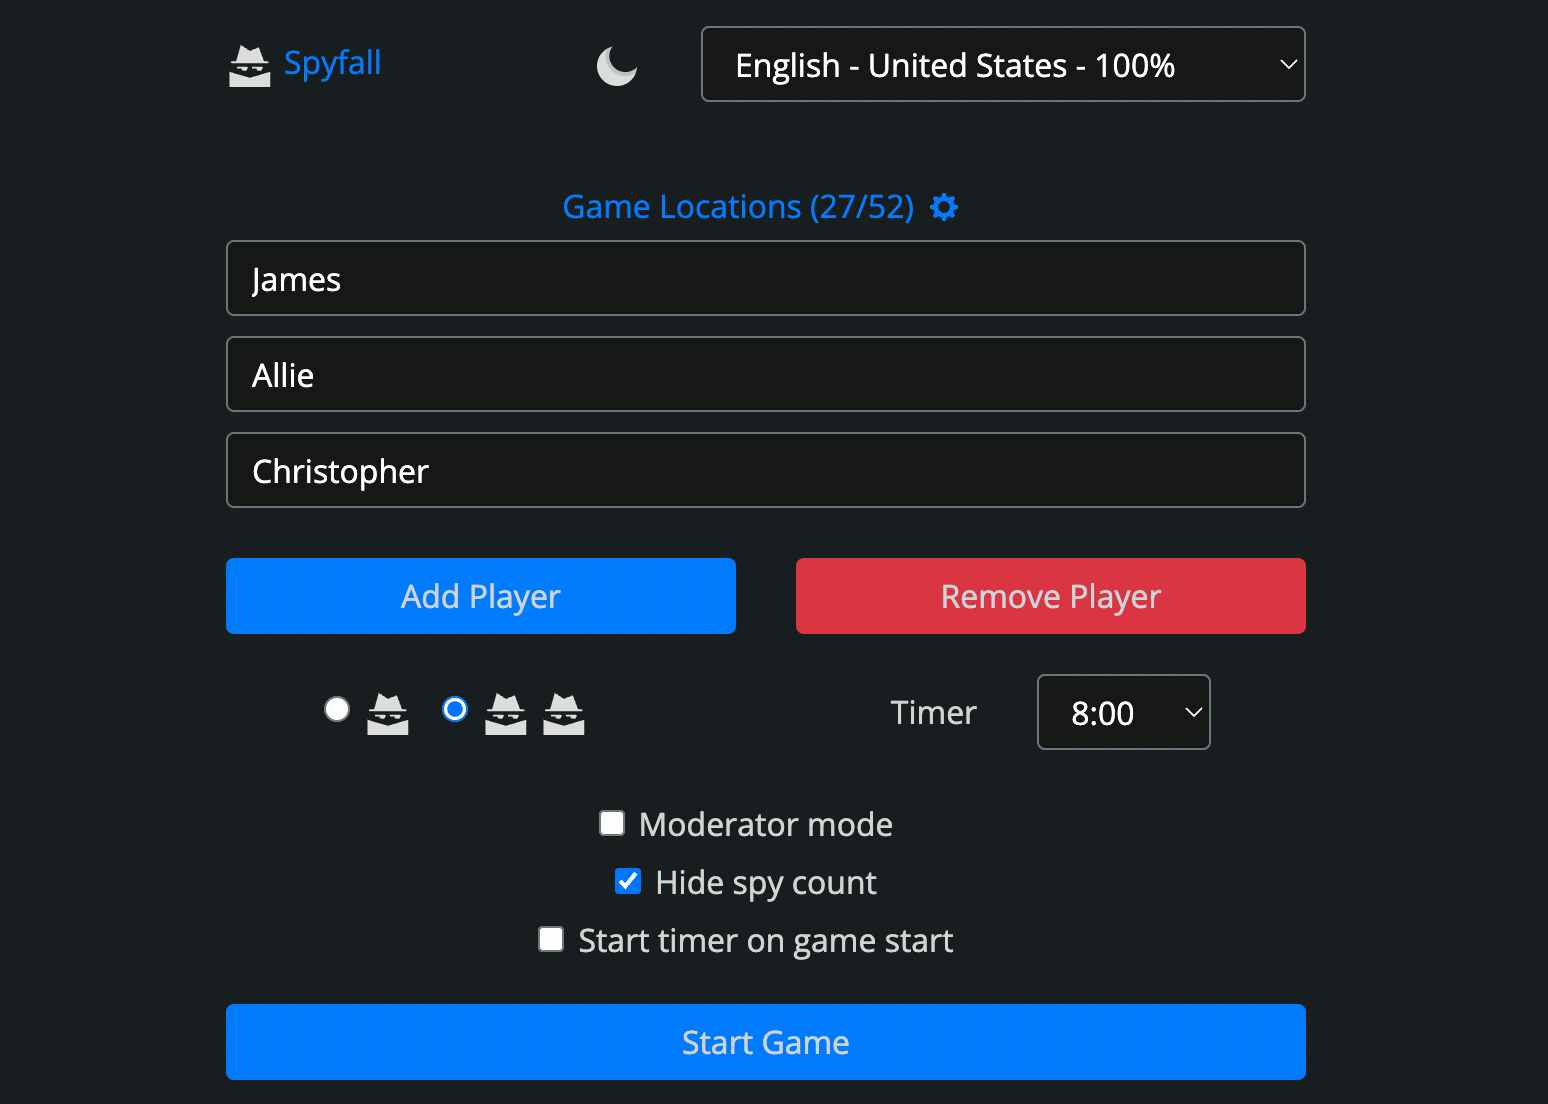 Online Games to Play with Your Friends – GradGuard